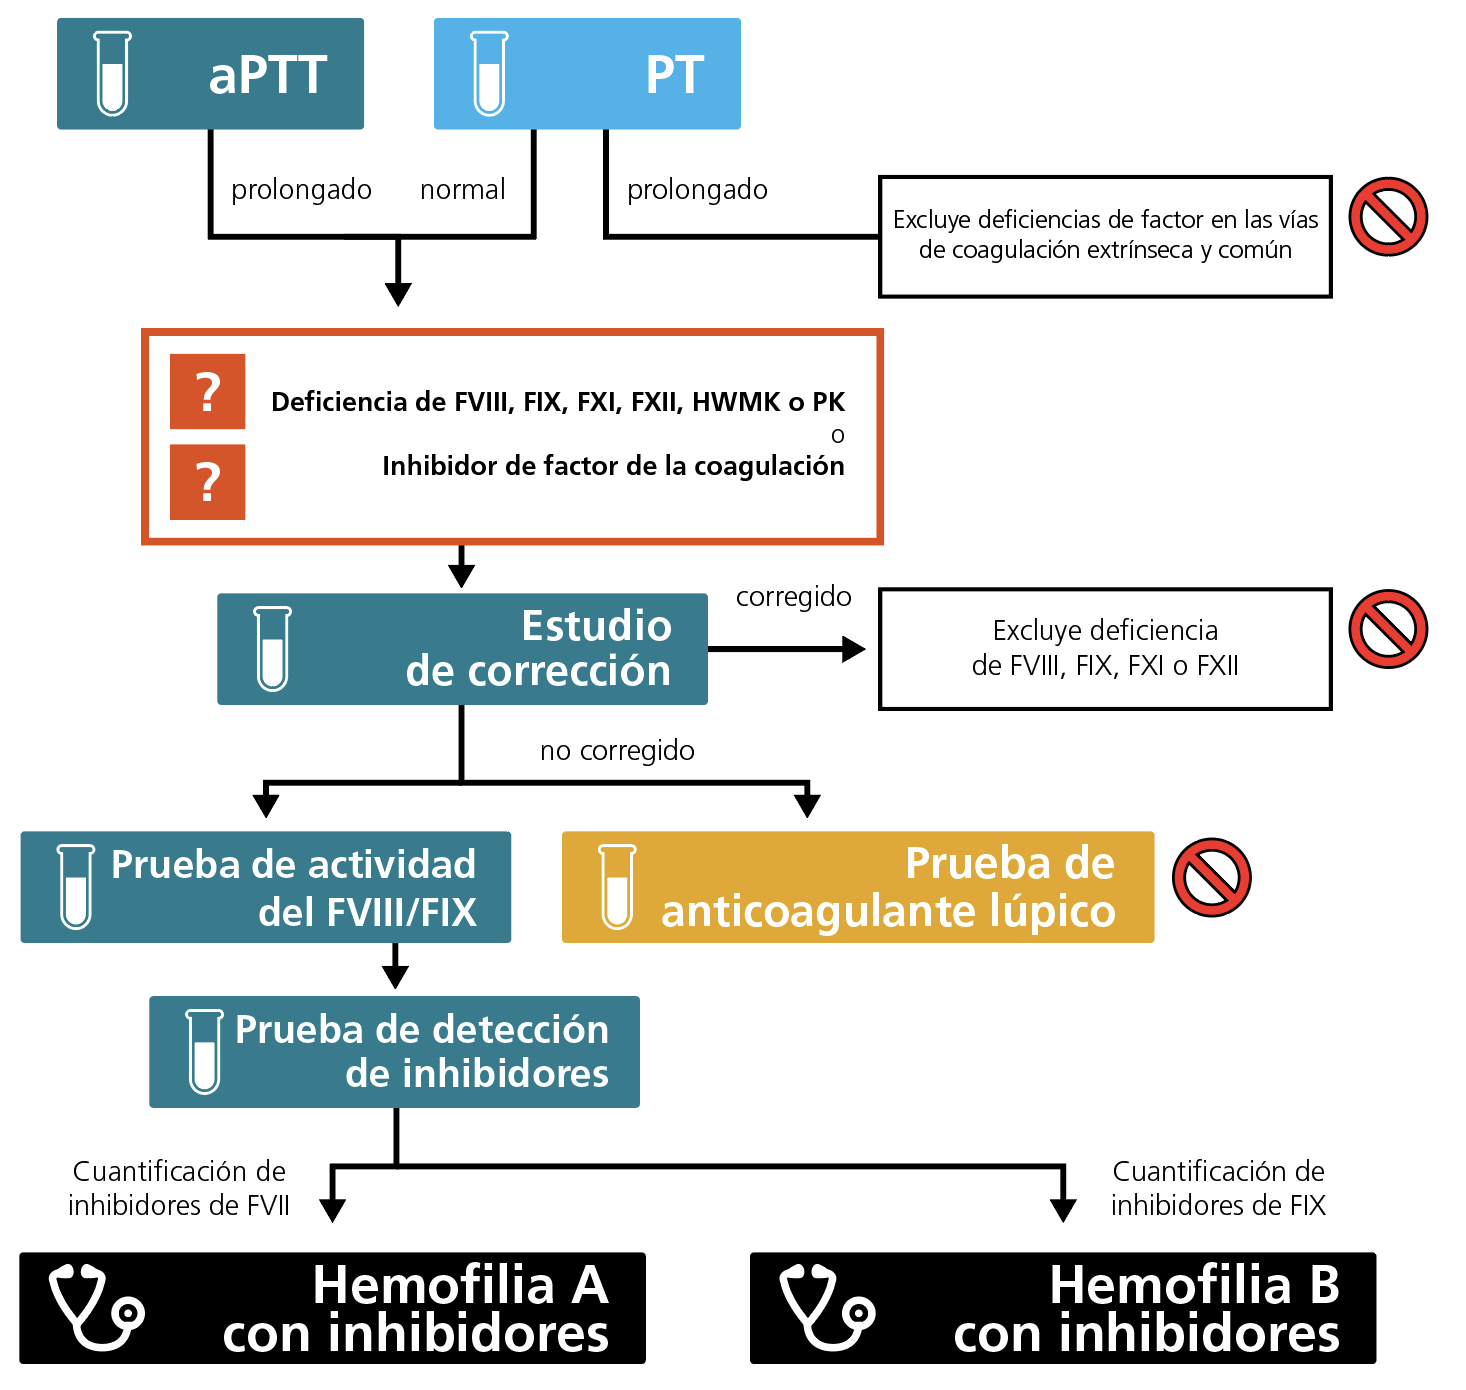 Algorithm for the laboratory diagnosis of haemophilia A or B with inhibitors